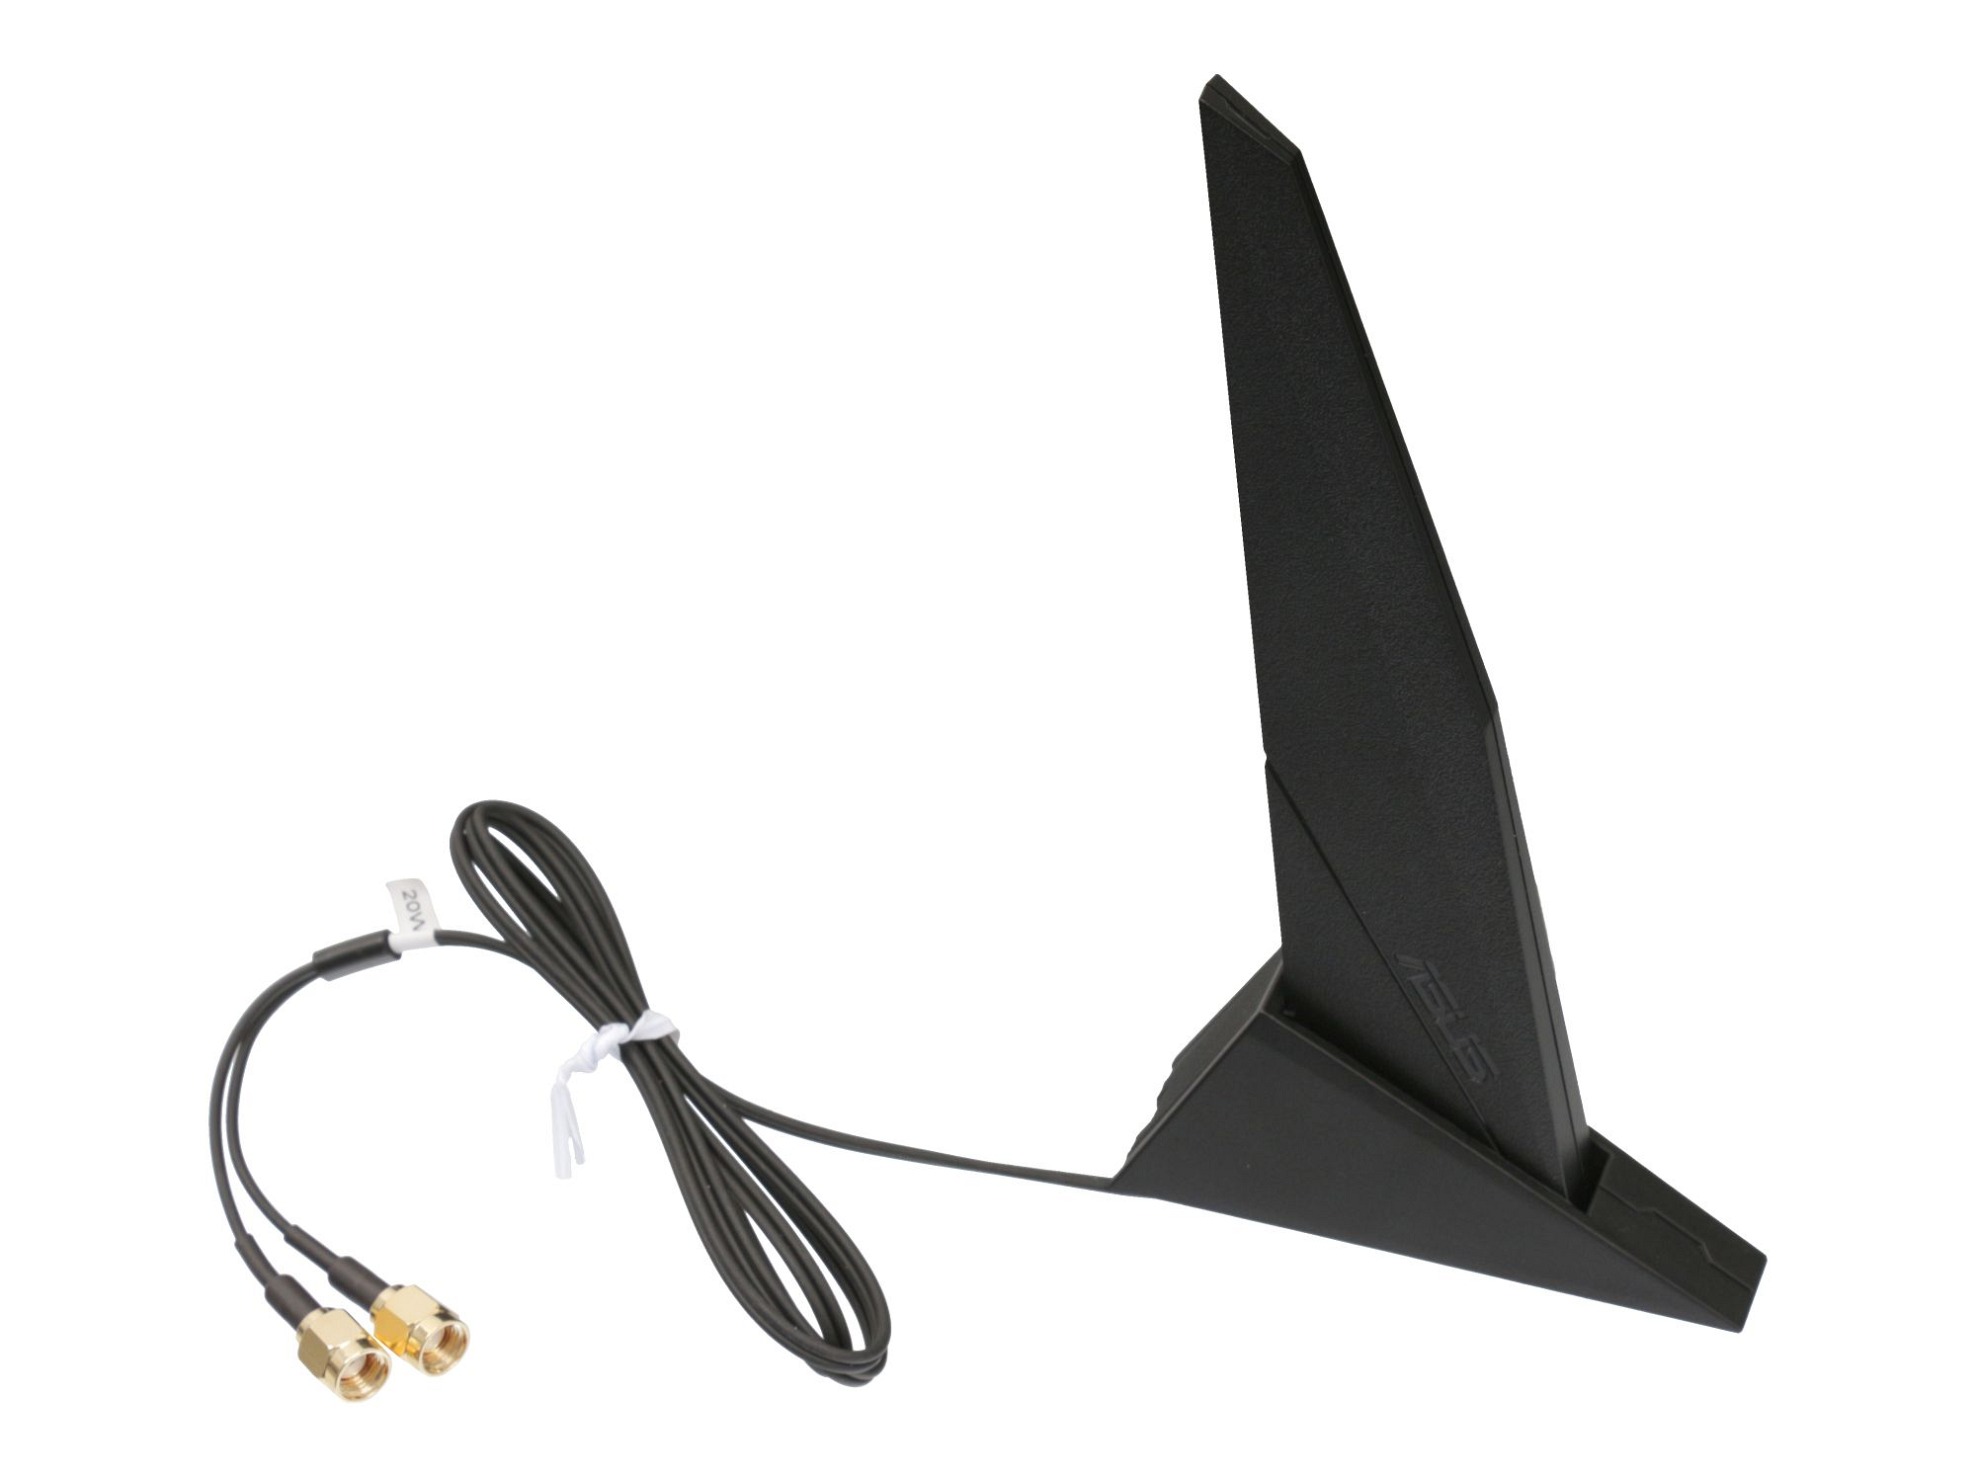 Externe Asus RP-SMA DIPOLE Antenne für Asus TUF GAMING B460-PRO